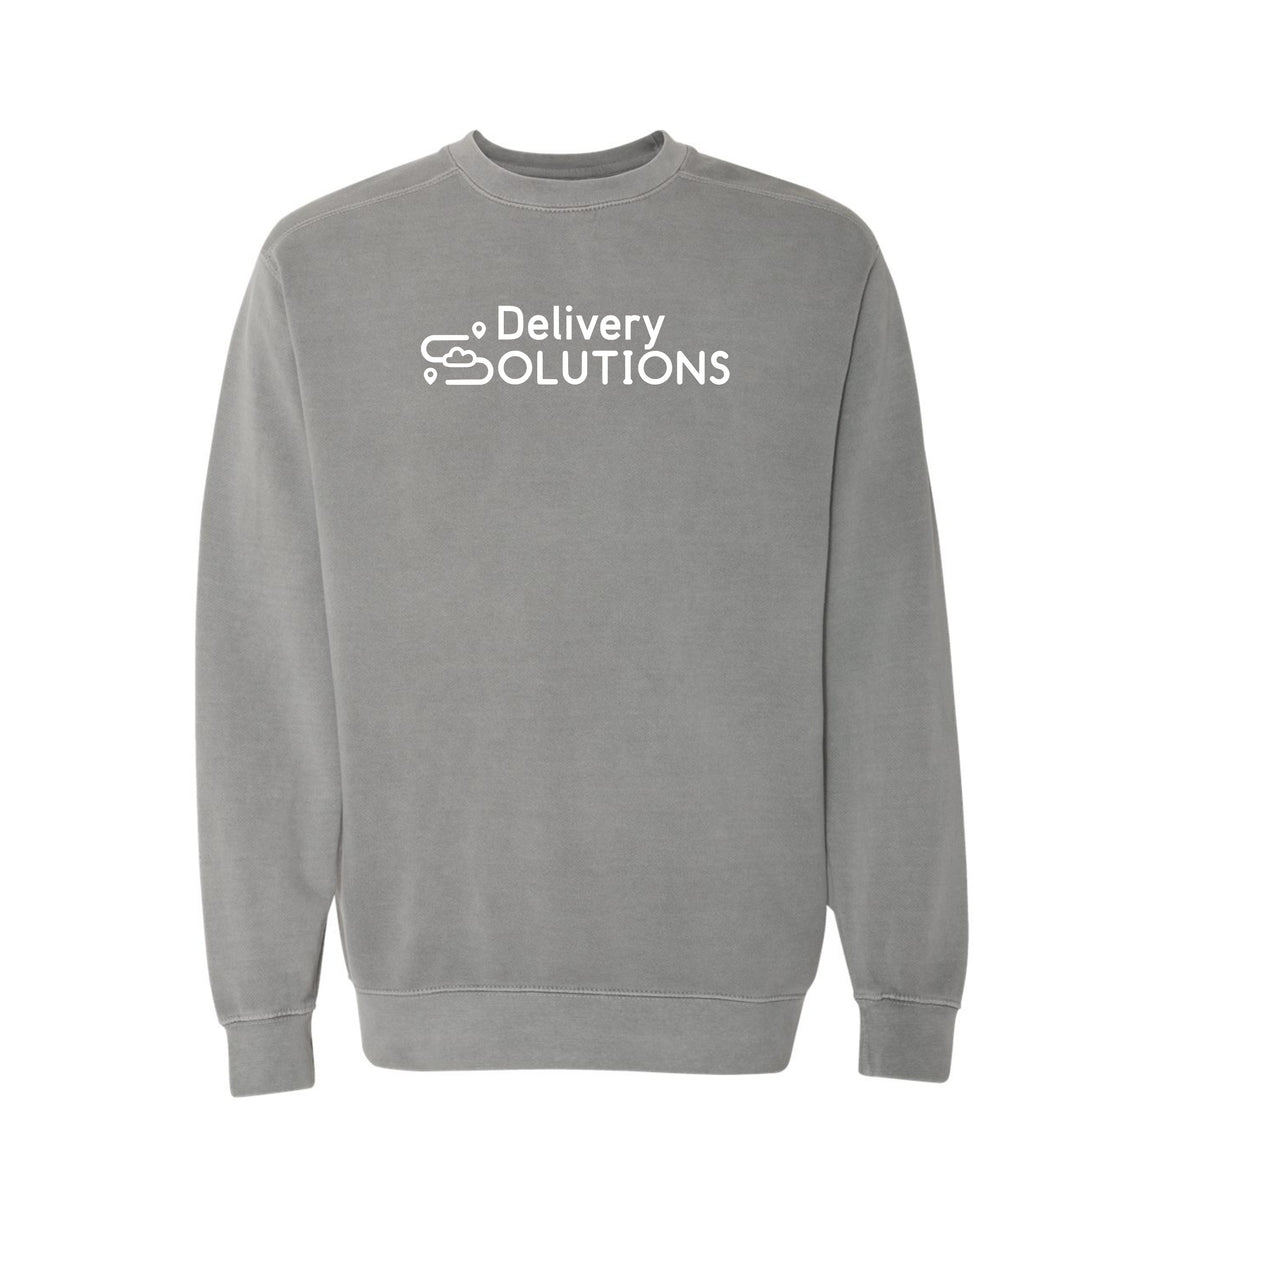 Adult - Unisex Garment-Dyed Sweatshirt - Comfort Colors (Delivery Solutions)